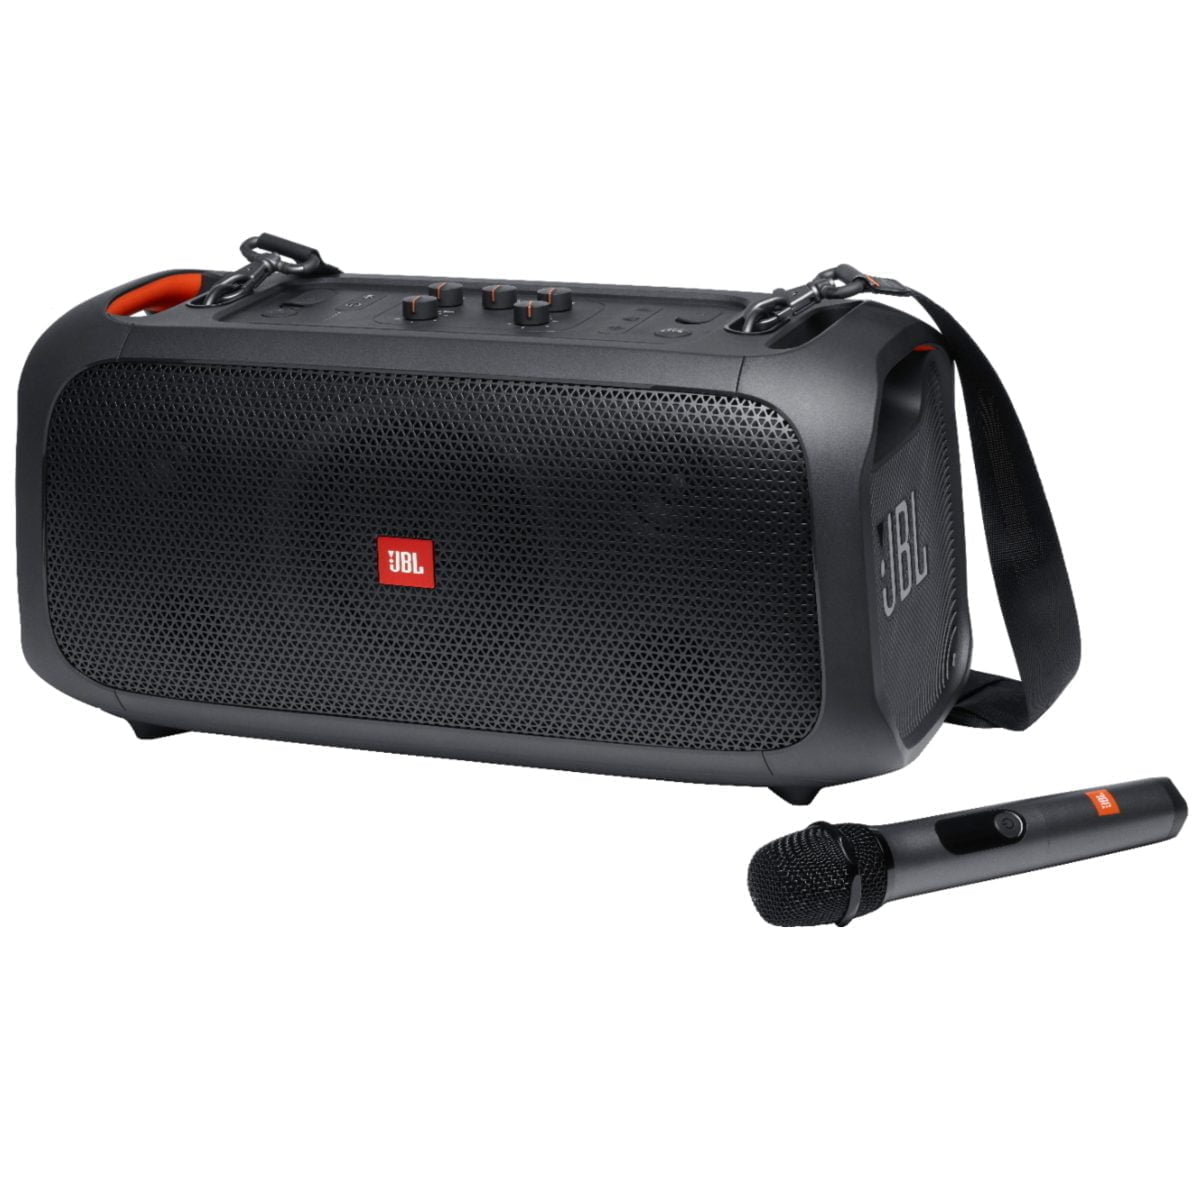 6426699Cv24D Scaled &Amp;Lt;H1 Class=&Amp;Quot;Heading-5 V-Fw-Regular&Amp;Quot;&Amp;Gt;Jbl - Partybox On-The-Go Portable Party Speaker - Black&Amp;Lt;/H1&Amp;Gt; Take Your Party Anywhere And Sing Everywhere. From Beach Parties To Festivals, The Jbl Partybox On-The-Go Lets You See, Hear And Feel The Beat. Turn It Up Loud With 100 Watts Of Powerful Jbl Pro Sound, Synched To A Dazzling Light Show. Access Your Favorite Tunes With Bluetooth, Usb, Aux And Tws (True Wireless Stereo) Connectivity, Grab A Friend And Sing Your Hearts Out With The Jbl Wireless Mics, Or Use The Instrument Input To Play Along. With A Bottle Opener, Padded Shoulder Strap, Rechargeable Battery And Ipx4 Splash-Proof Protection, The Jbl Partybox On-The-Go Has Everything You Need To Get The Party Started—And Take It With You. Jbl Partybox Jbl Partybox On-The-Go Portable Party Speaker - Black